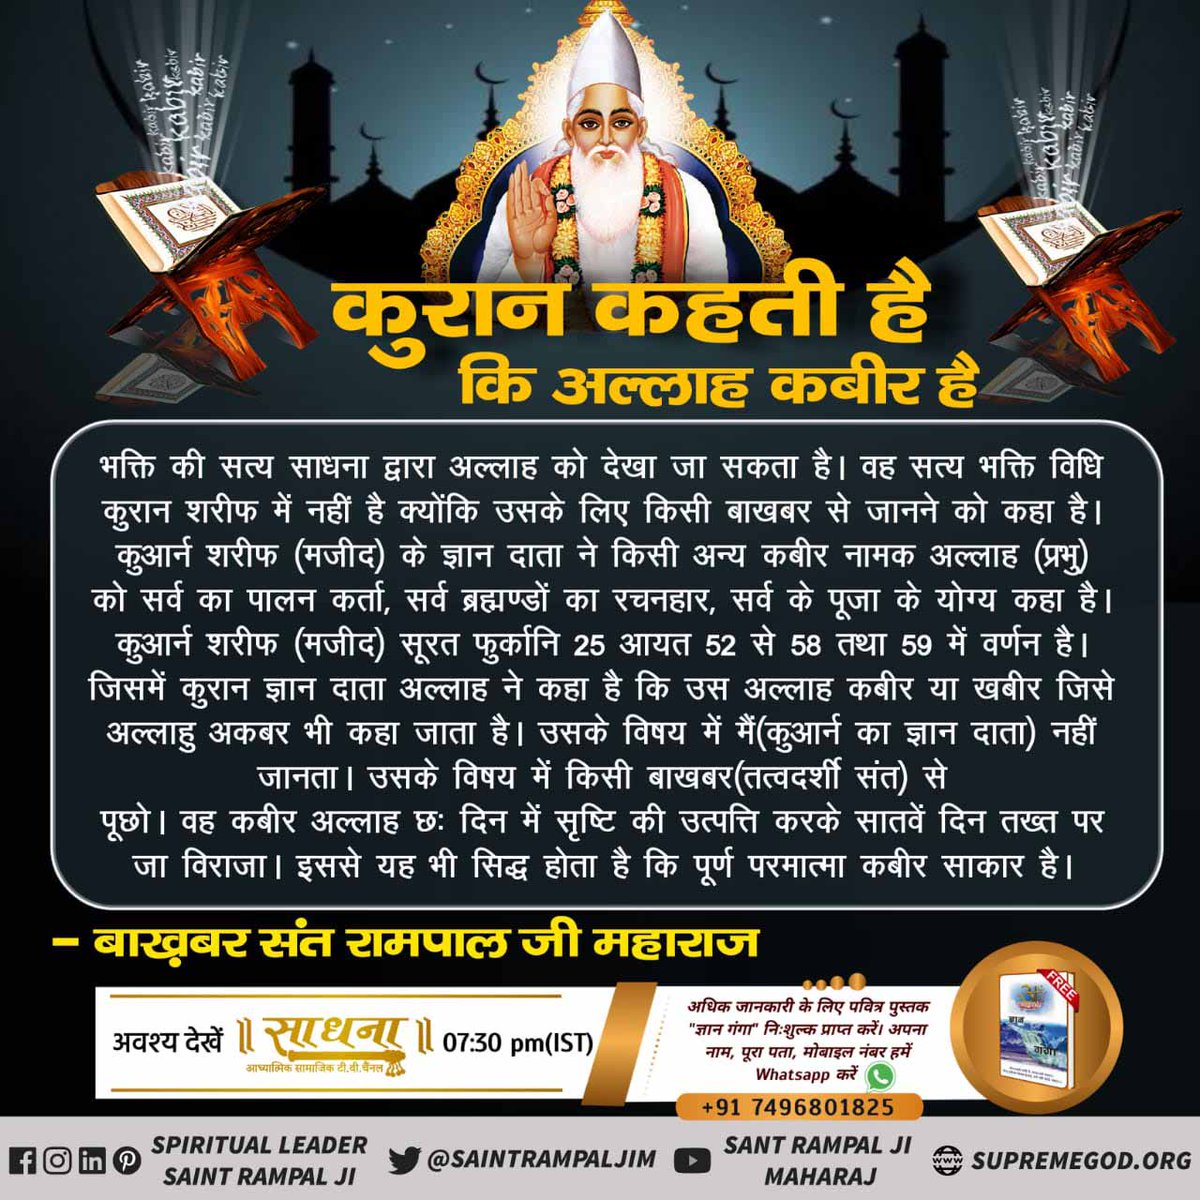 The narrator of Quran himself says that he does not have complete information about the supreme God/Great Allah Kabir and tells him to ask the Baakhabar.
(Quran Surah Furqan 25:59)
That Baakhabar, Last Prophet is Sant Rampal Ji Maharaj
#FactsOfIslam_By_SaintRampalJi